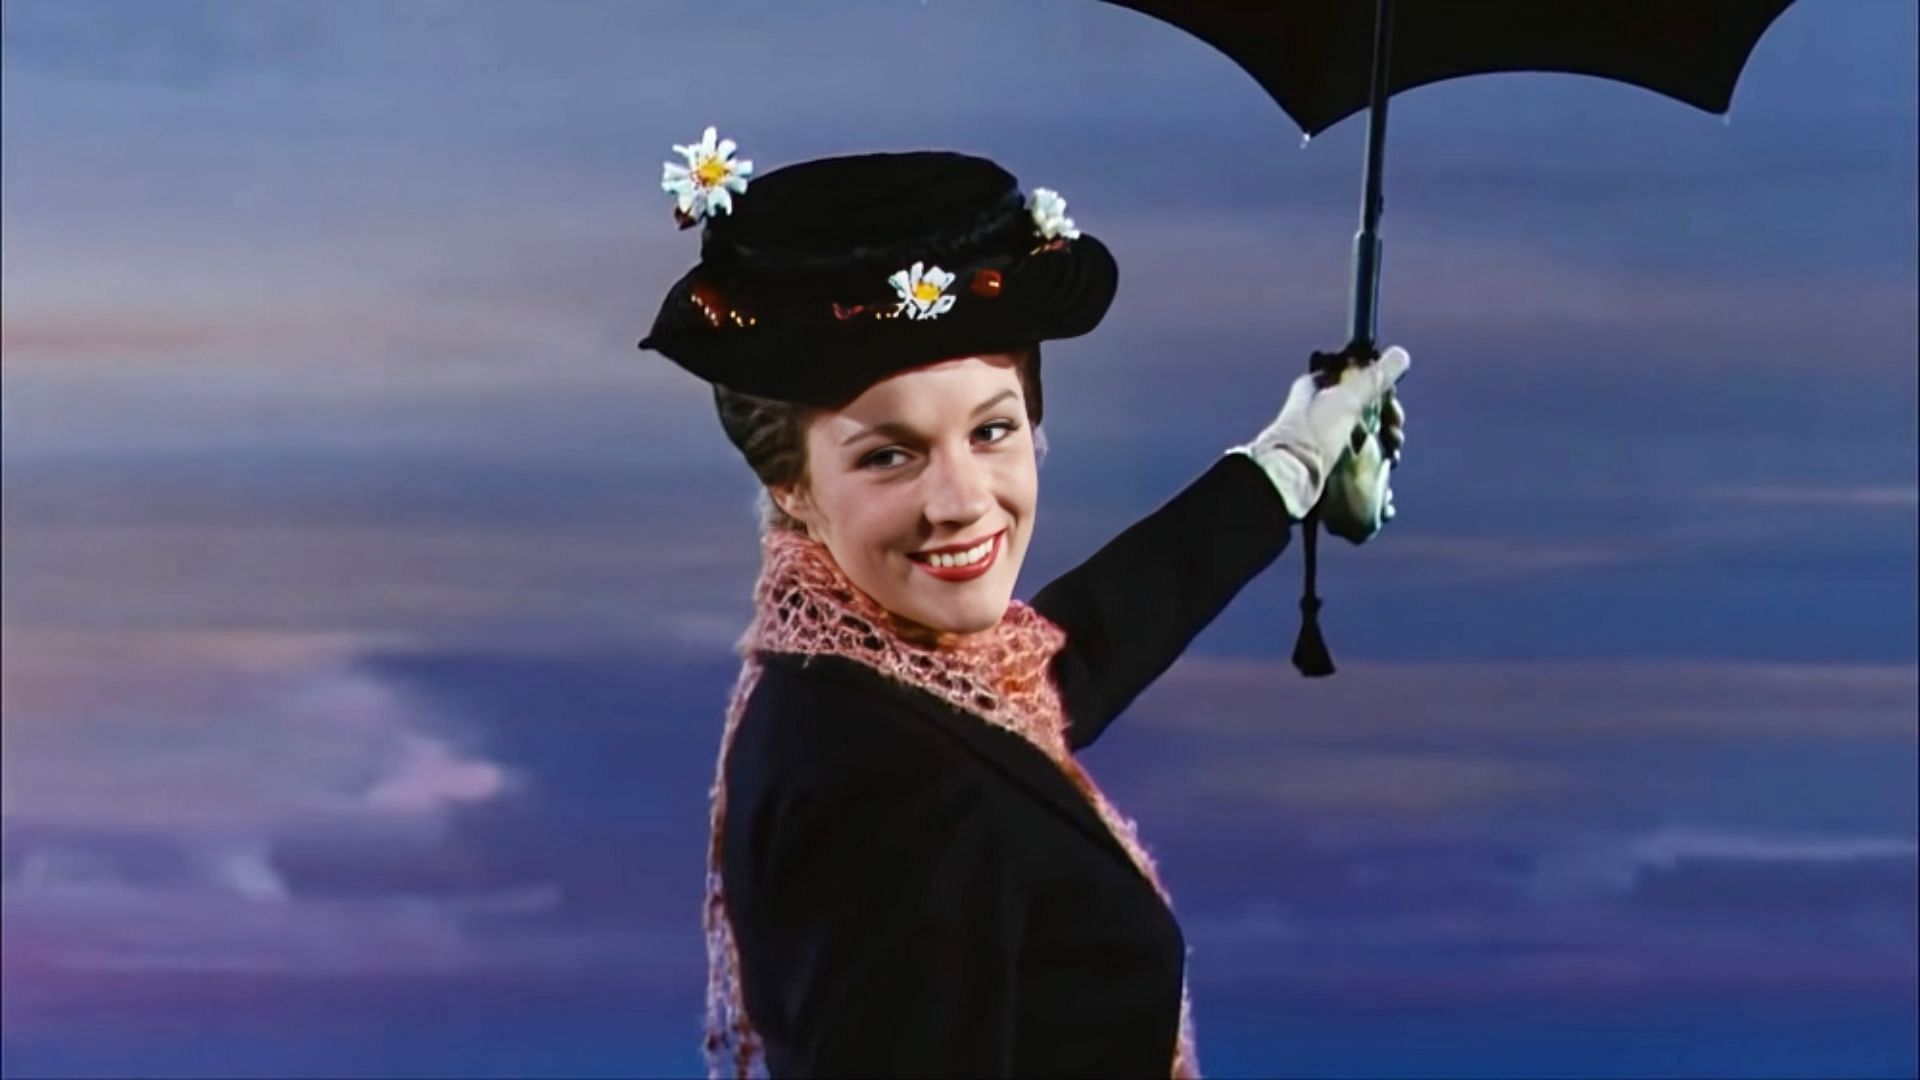 Julie Andrews as titular character in the 1964 film. (Image via Wikimedia Commons)